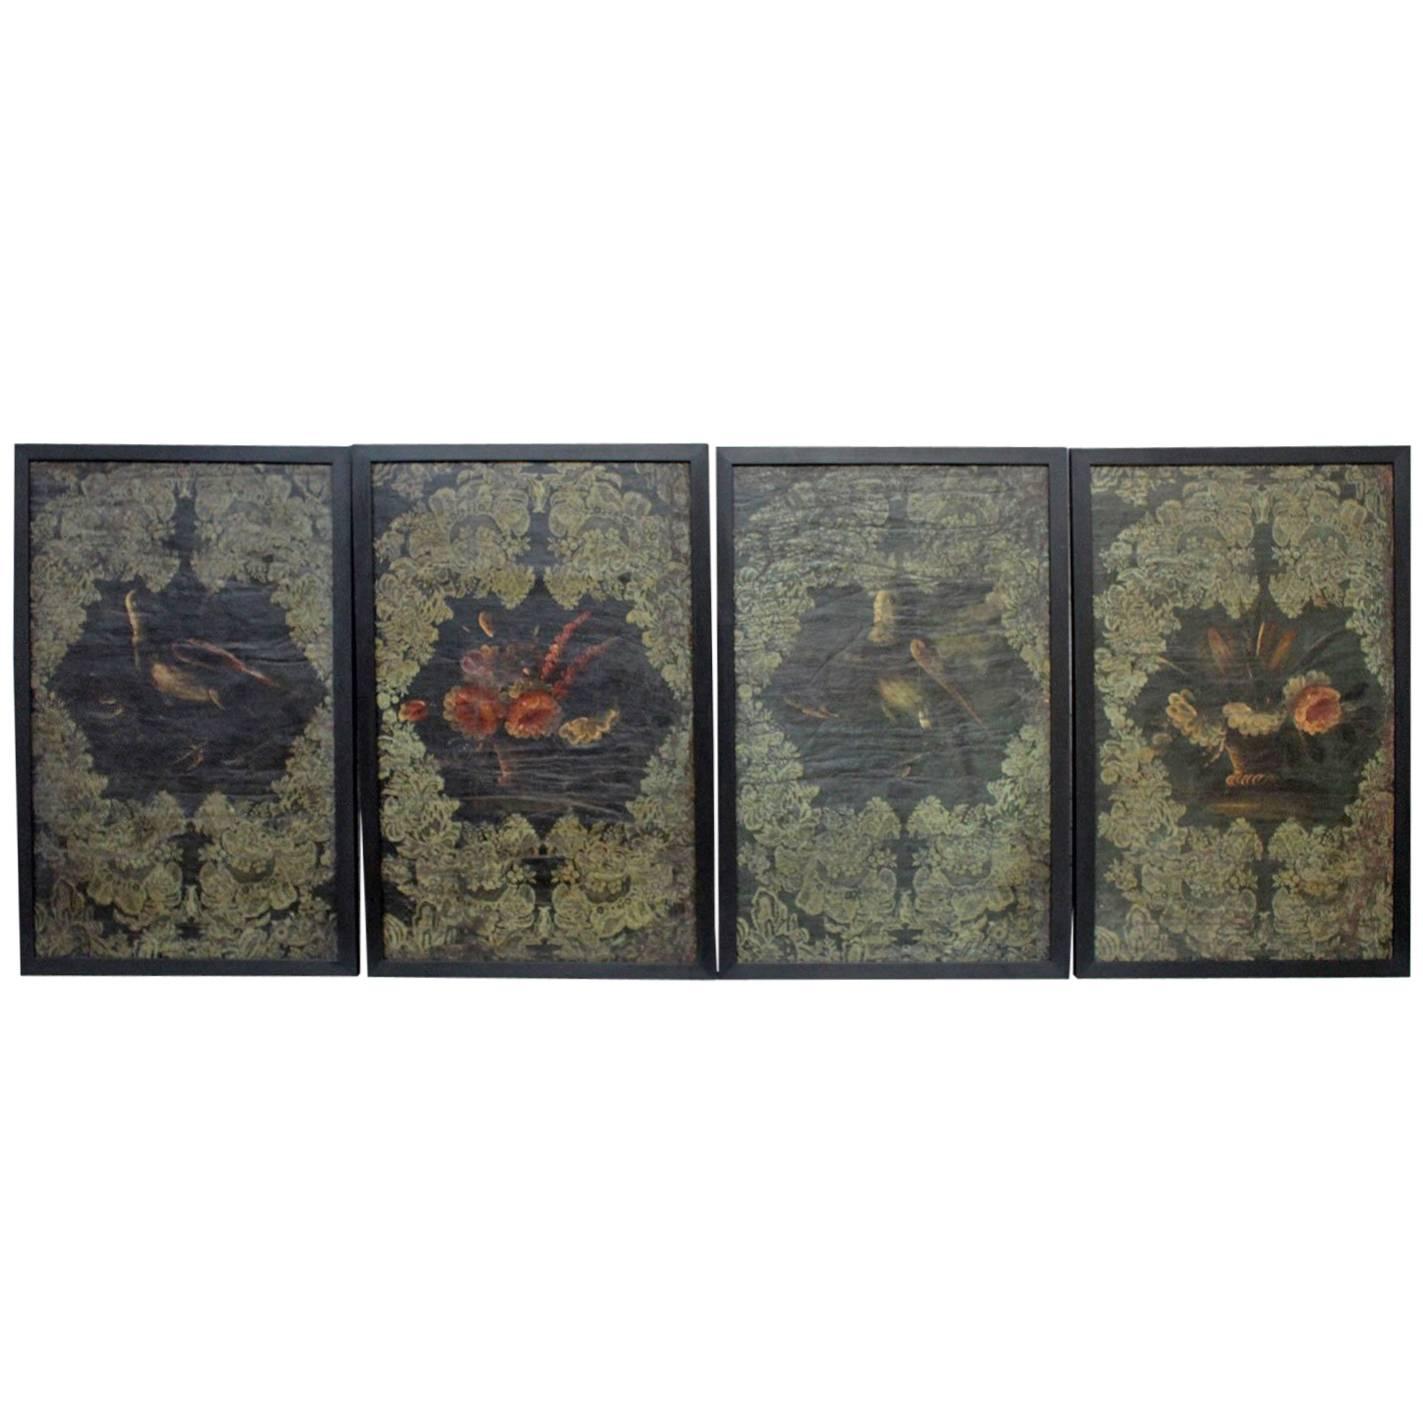 Set of Four 17th Century, Spanish Oil on Hessian Wall Covering Paintings